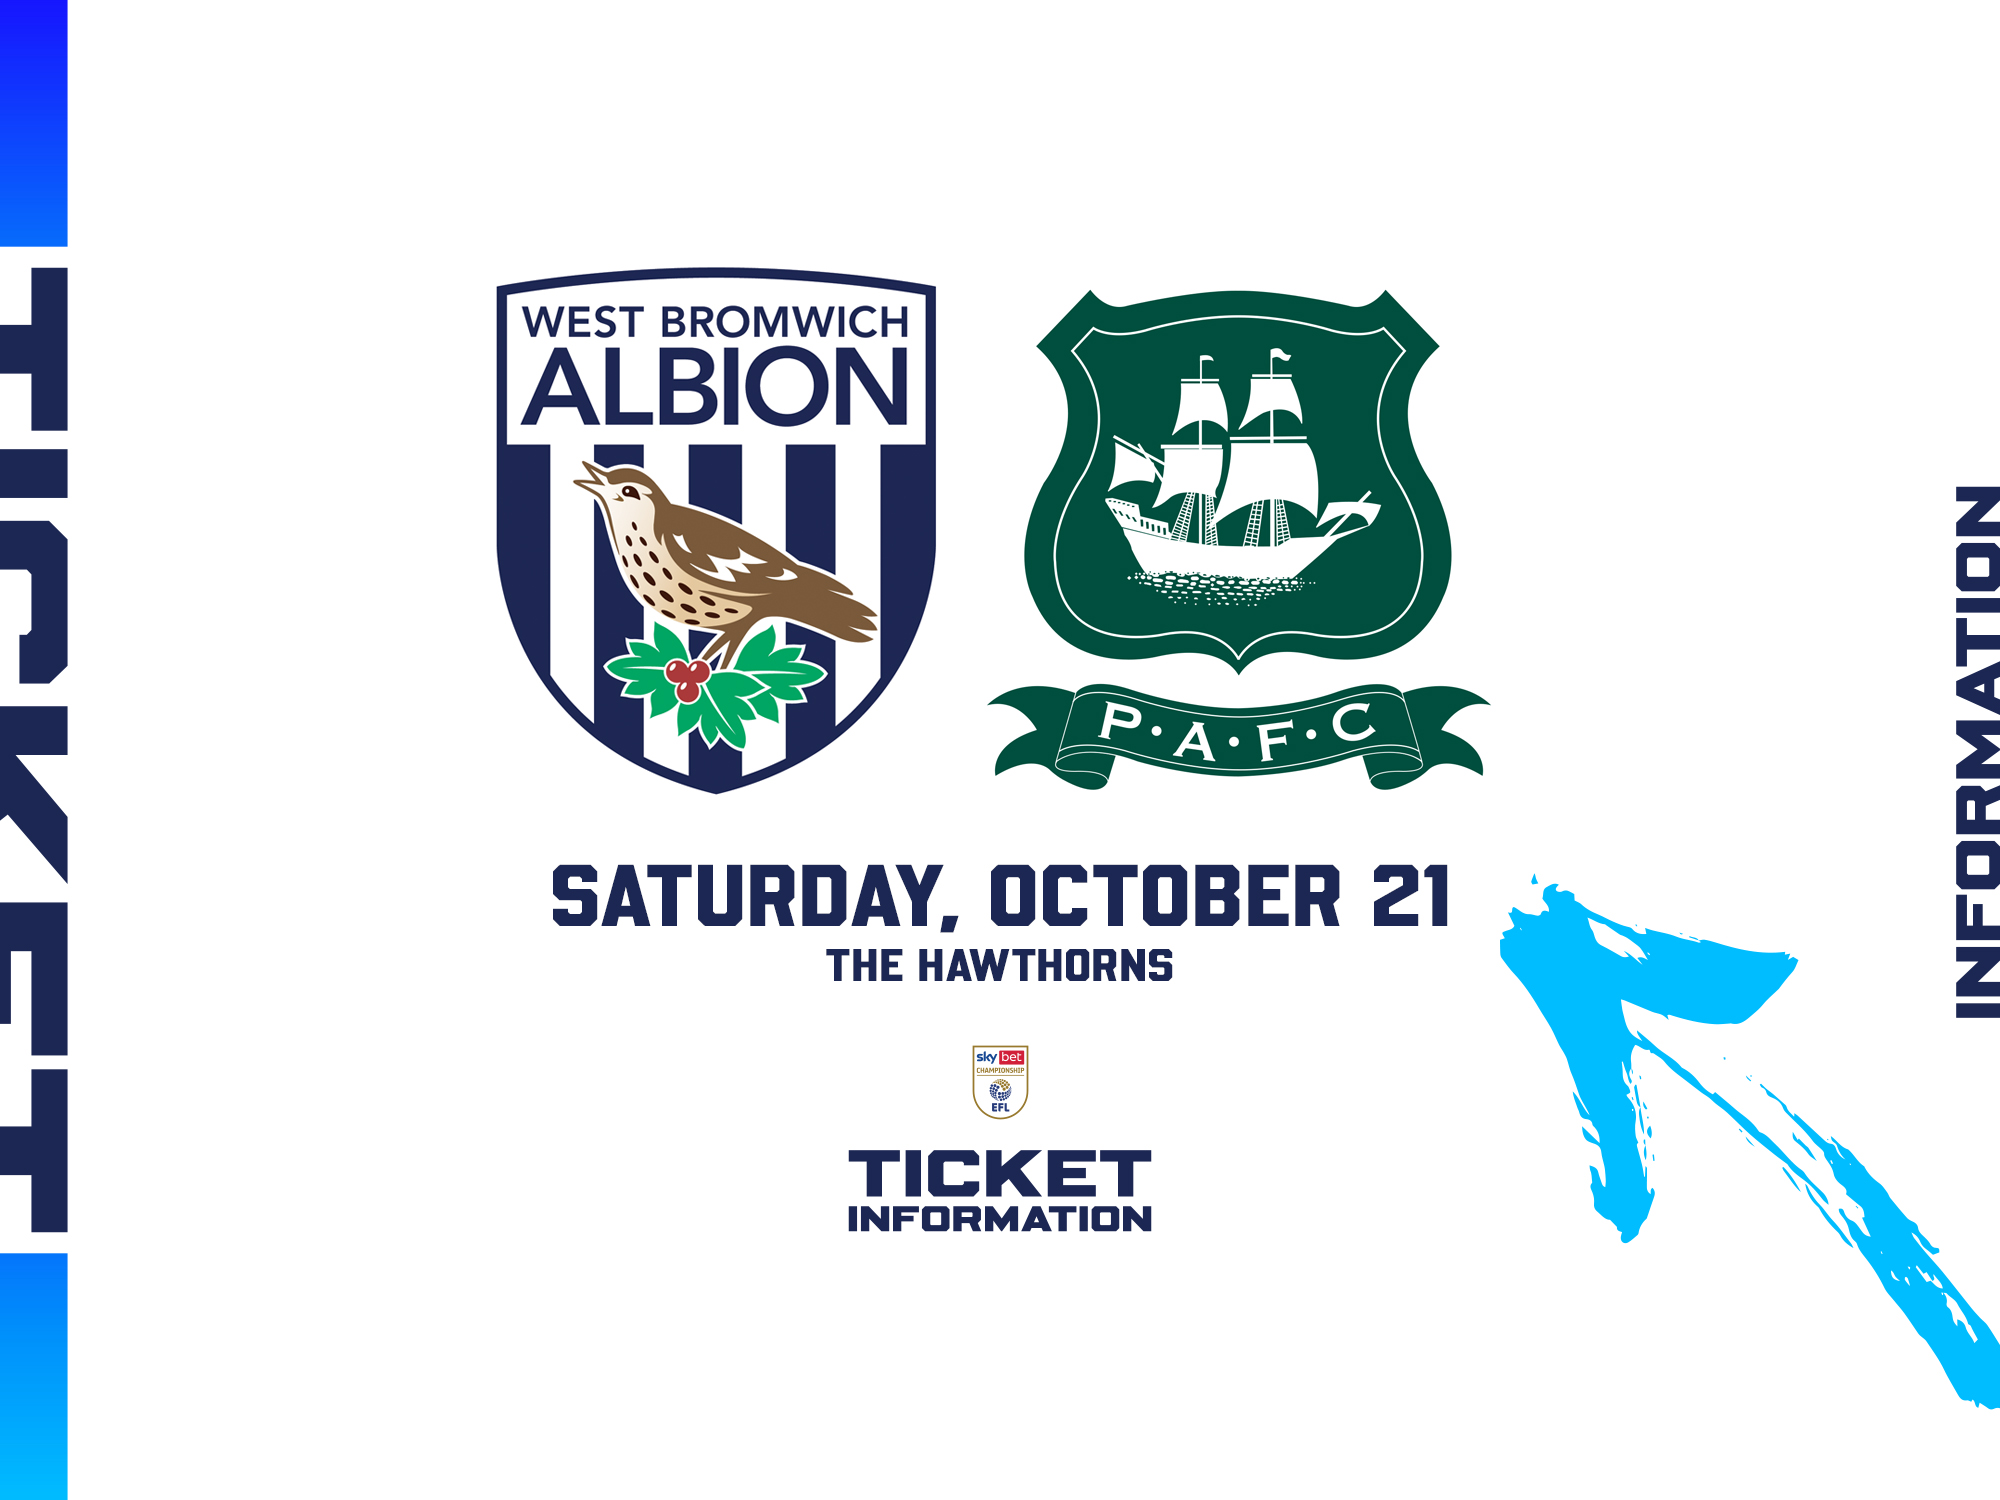 A ticket graphic displaying information for Albion's game against Plymouth